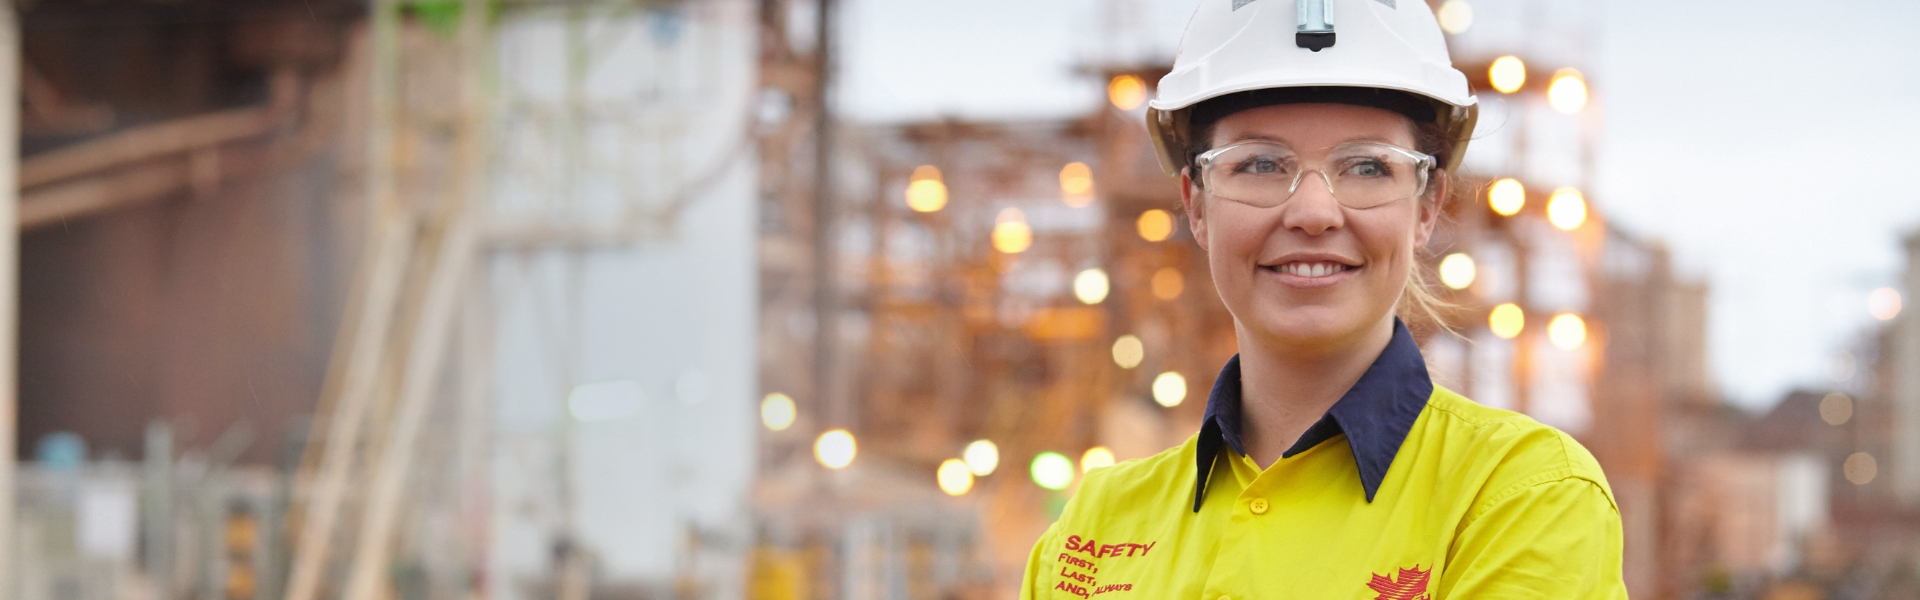 Smiling Redpath employee above ground with lights from a mine site in the background.